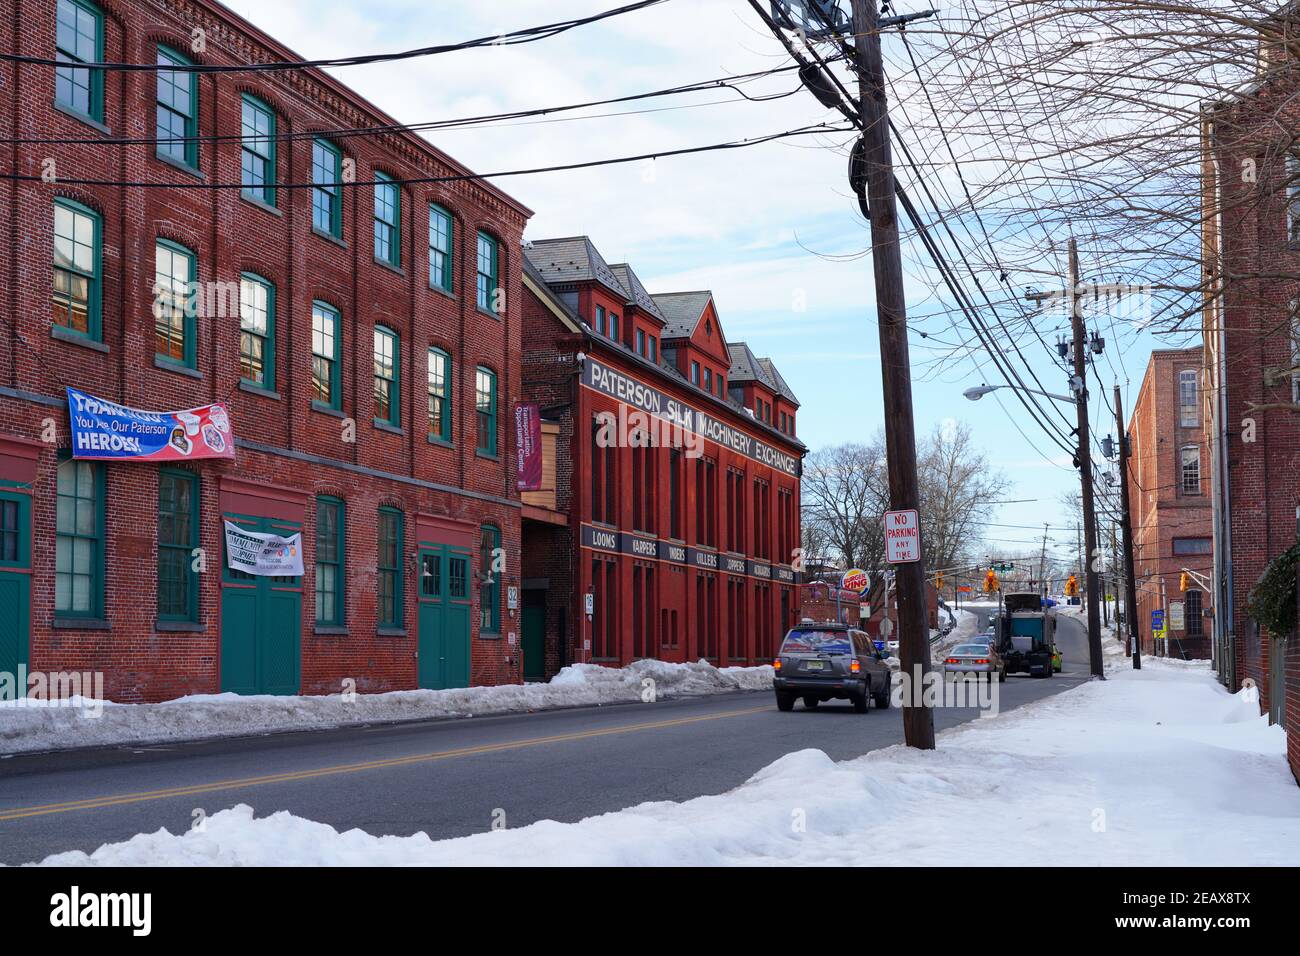 PATERSON, NJ -6 FEB 2021- Winter view of the Old Great Falls Historic District, an old industrial area around the landmark Society for the Establishme Stock Photo